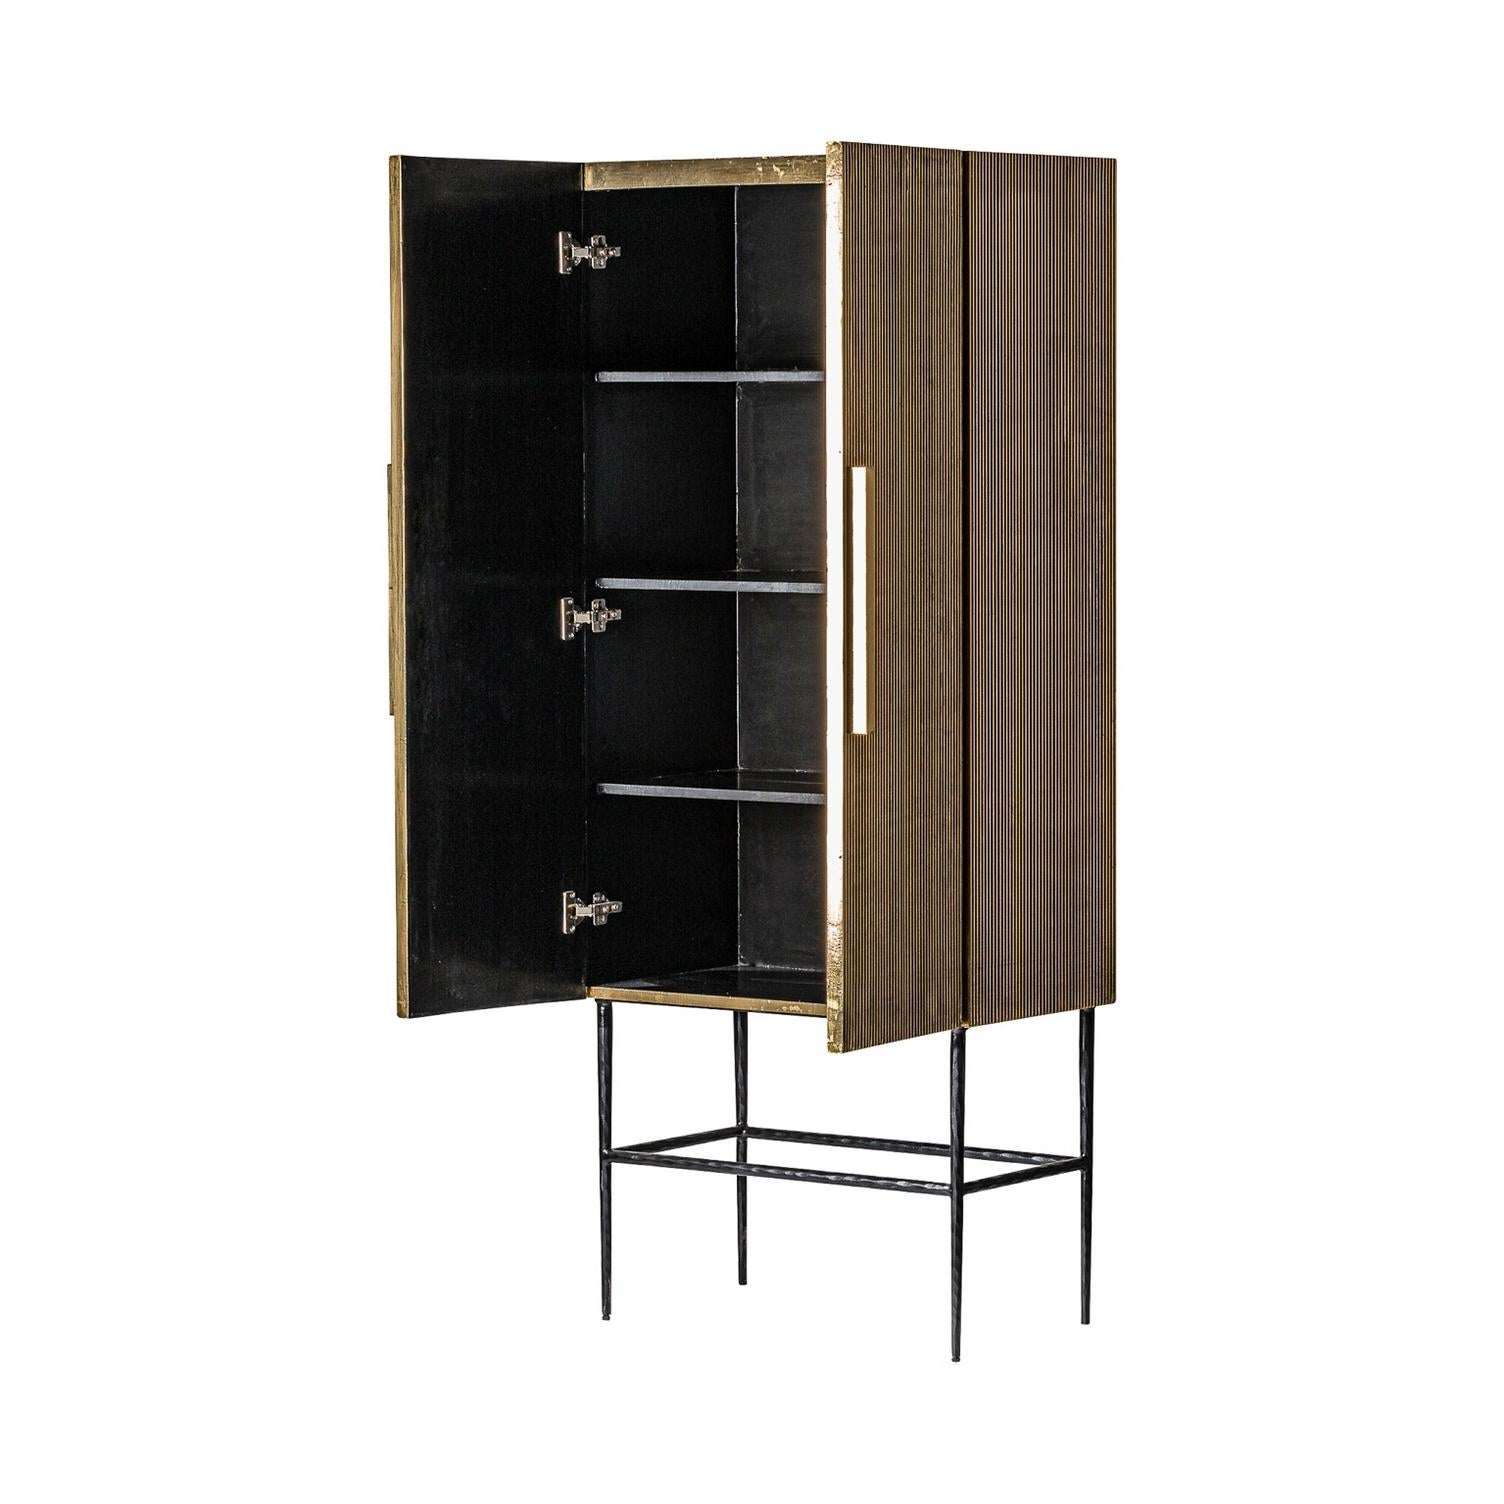 Art Deco style sideboard: An eyecatcher with graphic and aerial lines, composed of 2 long graphic panels doors opening on shelves spaces and airy metal feet.